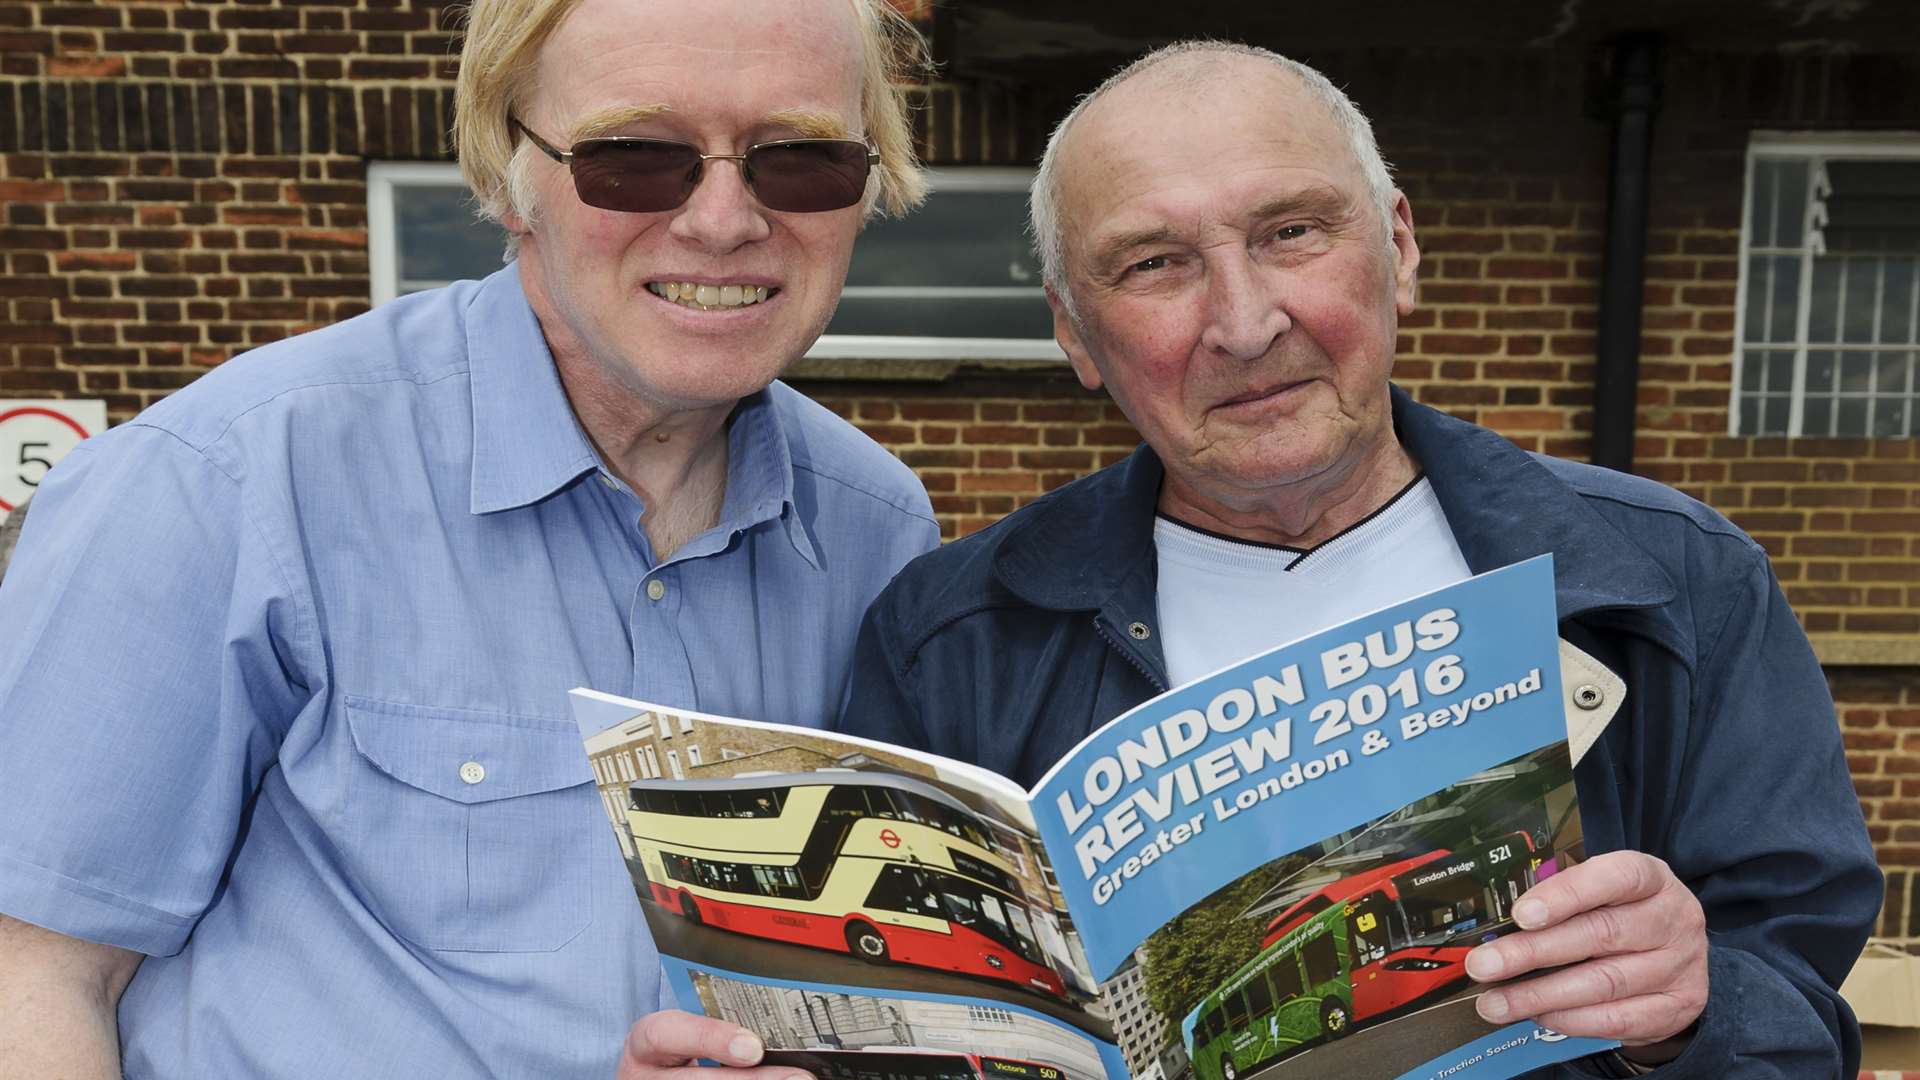 James Mair, left, and Les Stitson from London Omnibus Traction Society. Picture: Andy Payton